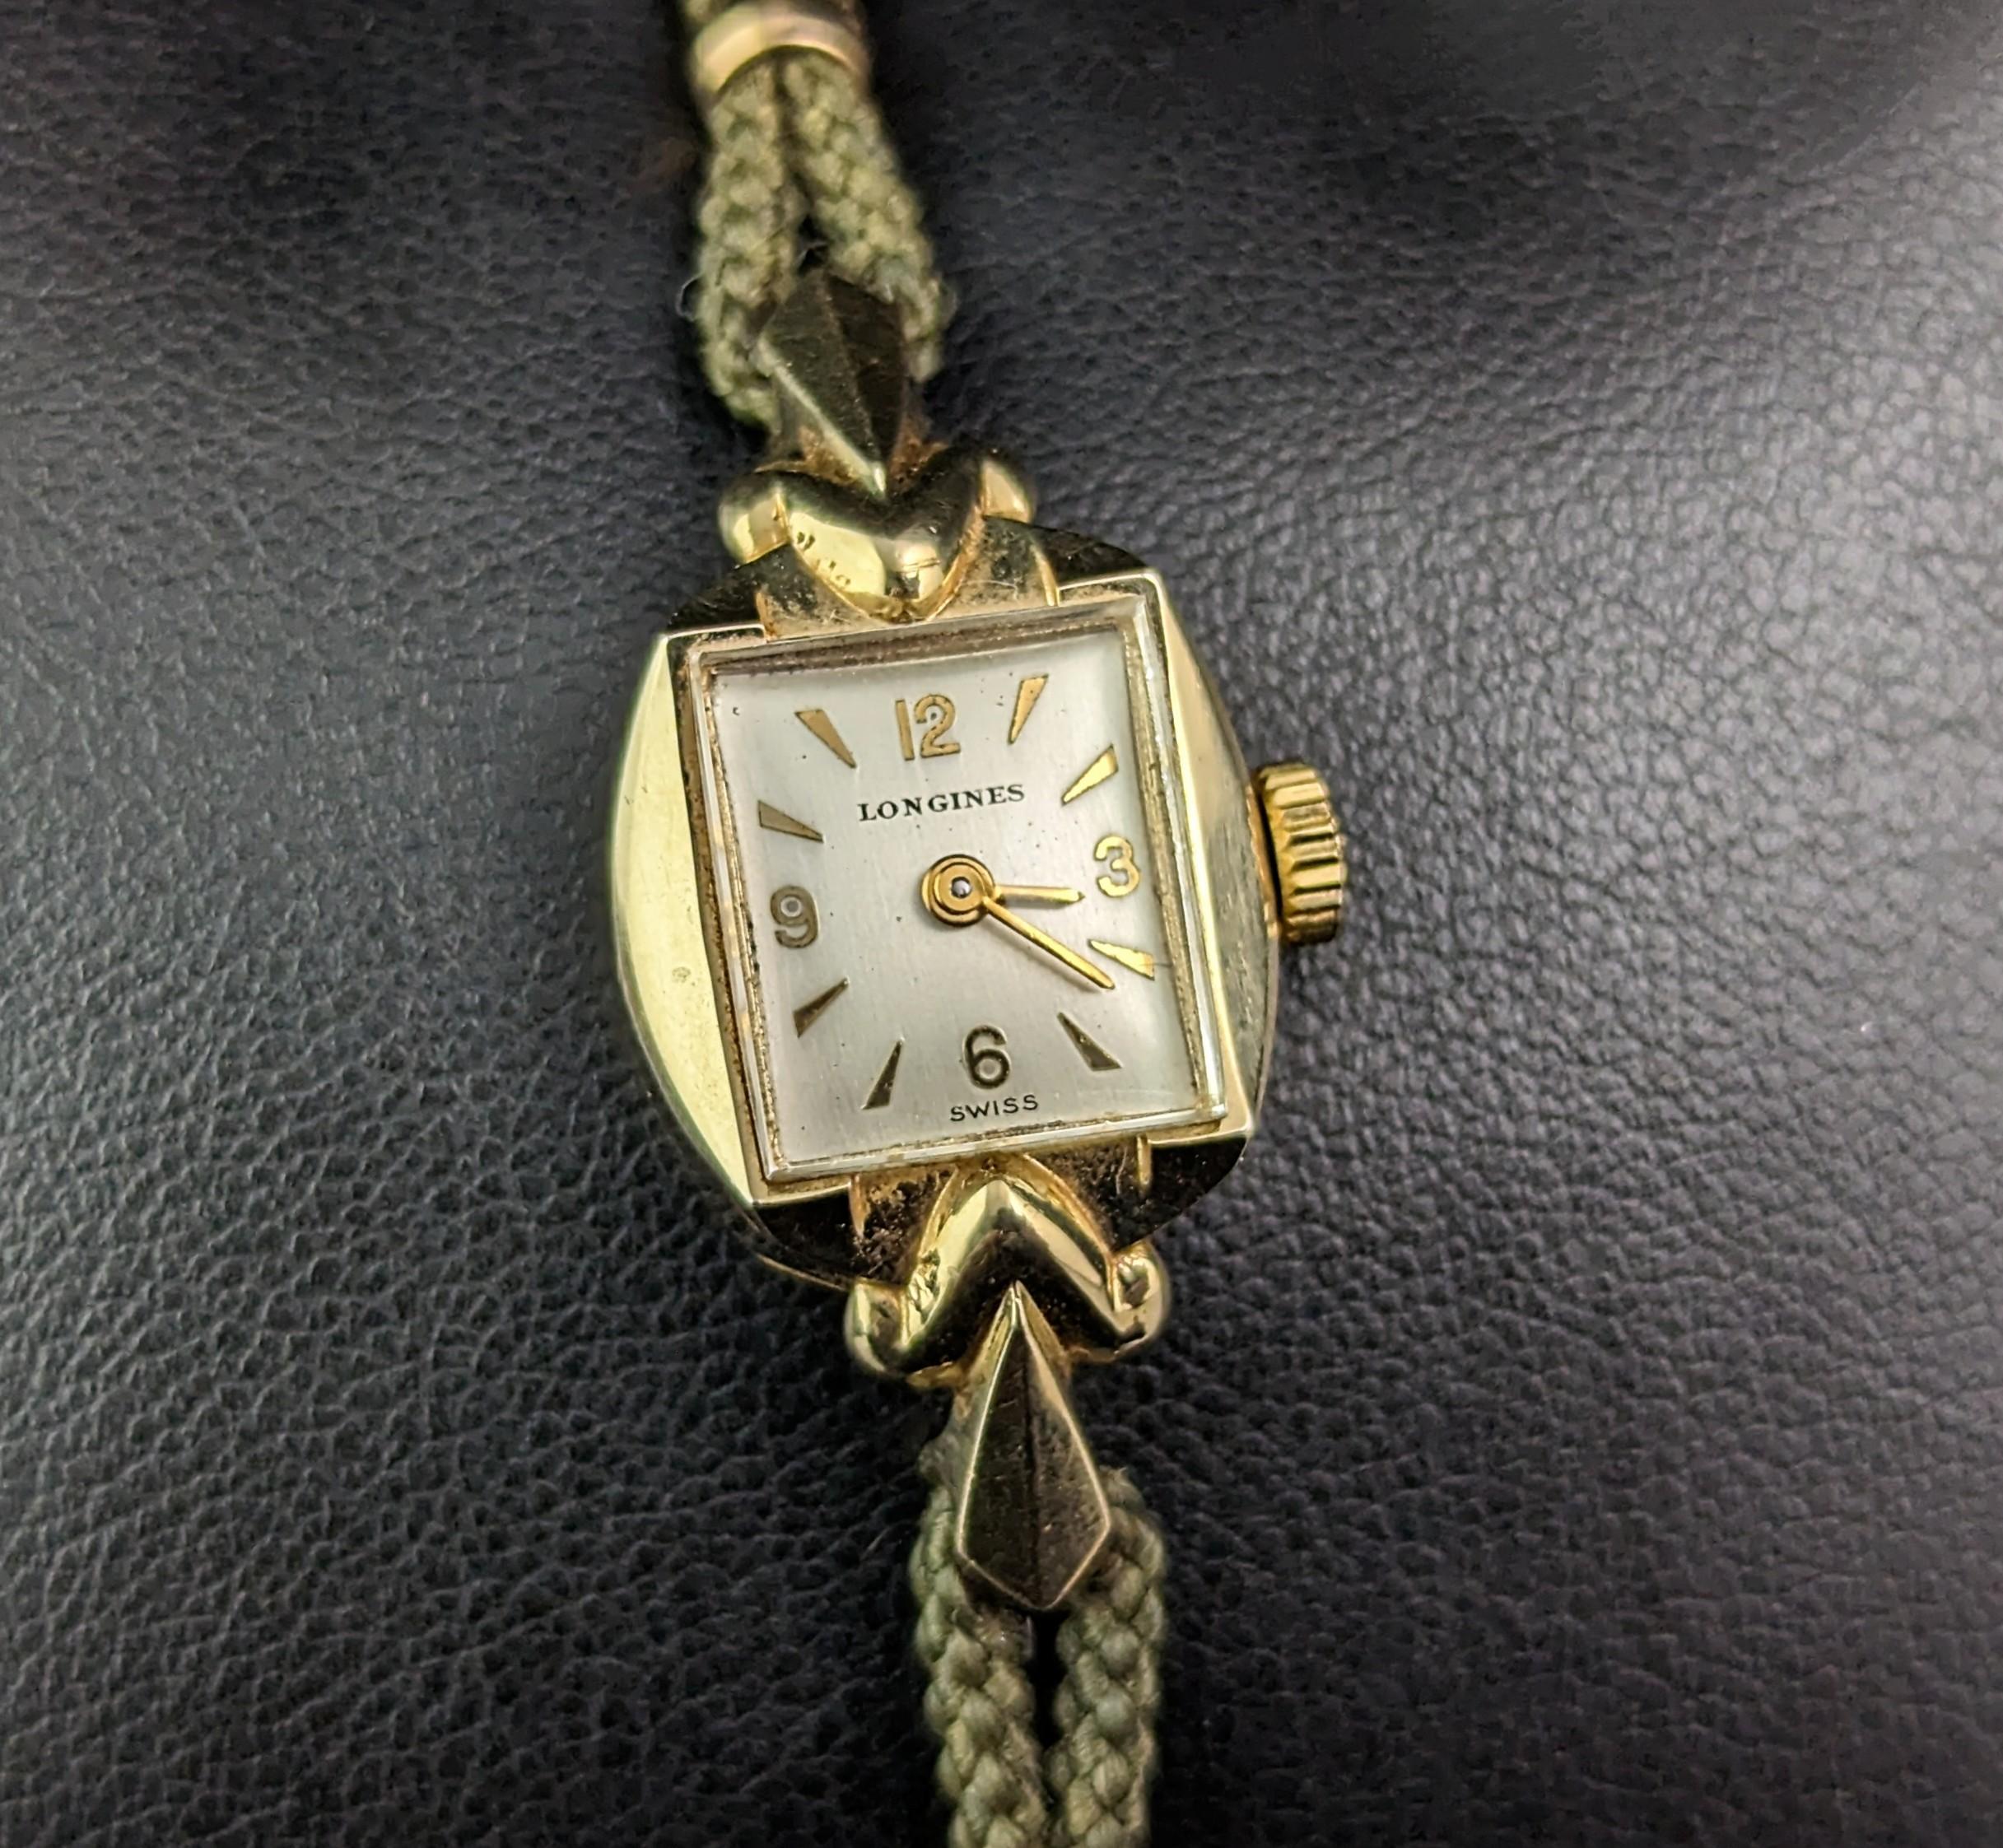 A gorgeous vintage 14ct gold ladies wristwatch.

It has a yellow gold case with a champagne tone dial with gold Arabic numerals and hands and a raised crystal.

Made by the renowned Longines the dial is marked Longines and the crown is branded.

The